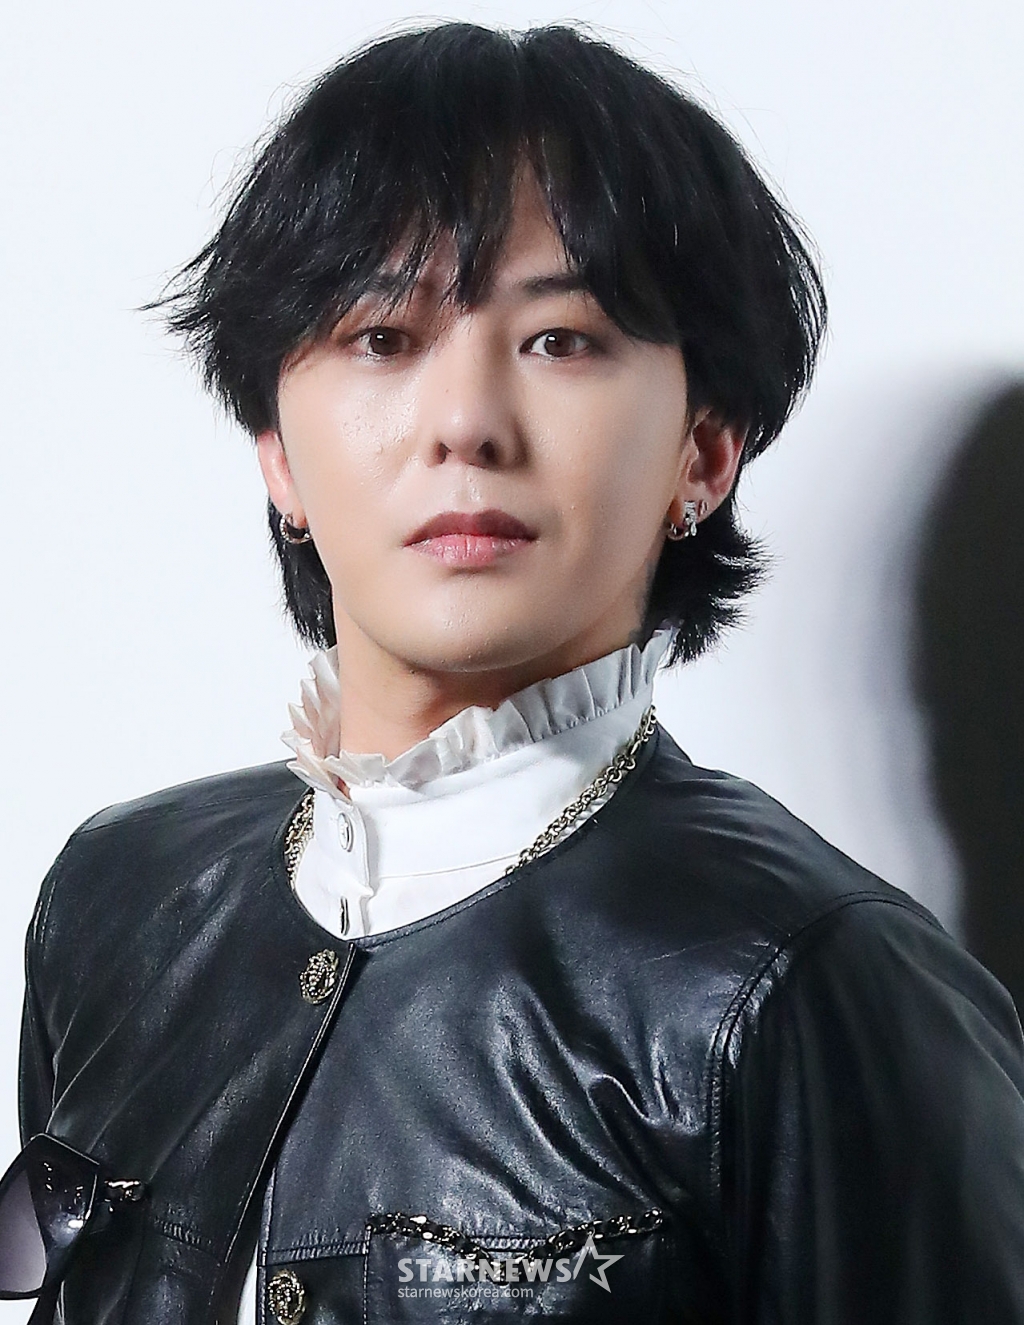 G-Dragon, the master of the music industry, is finally returning to the stage after a long wait, raising fans' anticipation